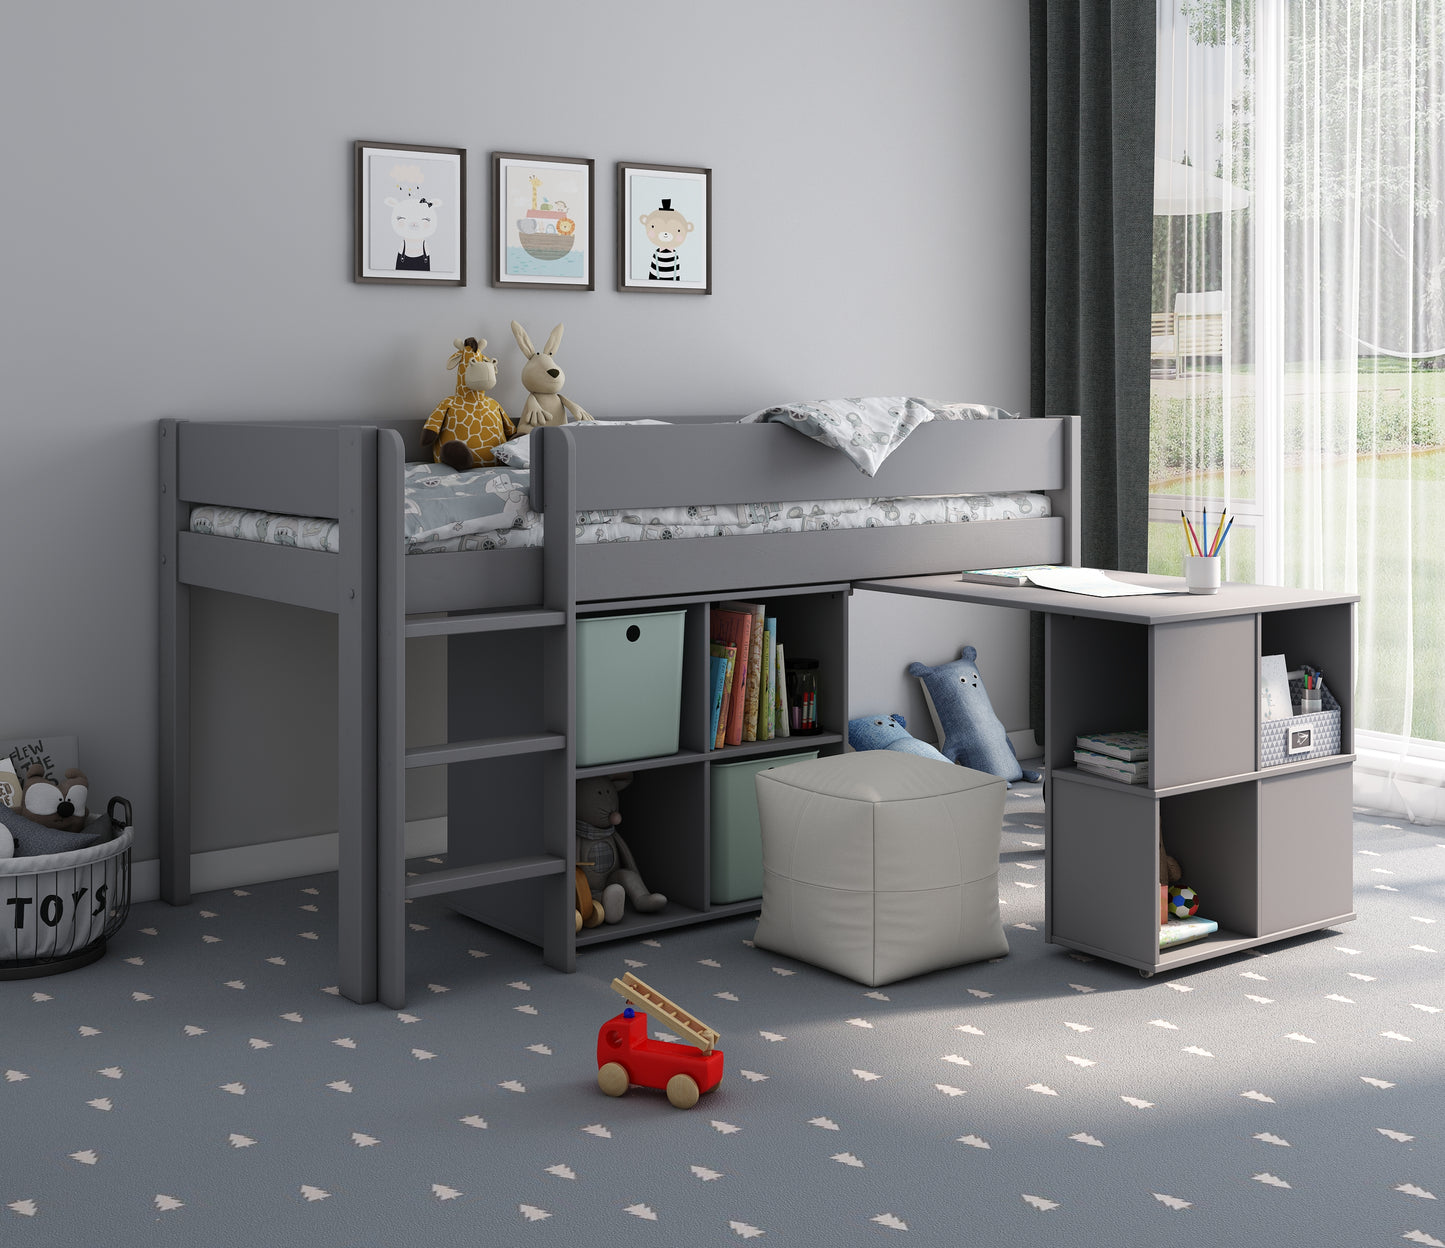 Estella - Mid Sleeper Bed with Cube, Desk & Optional Drawers